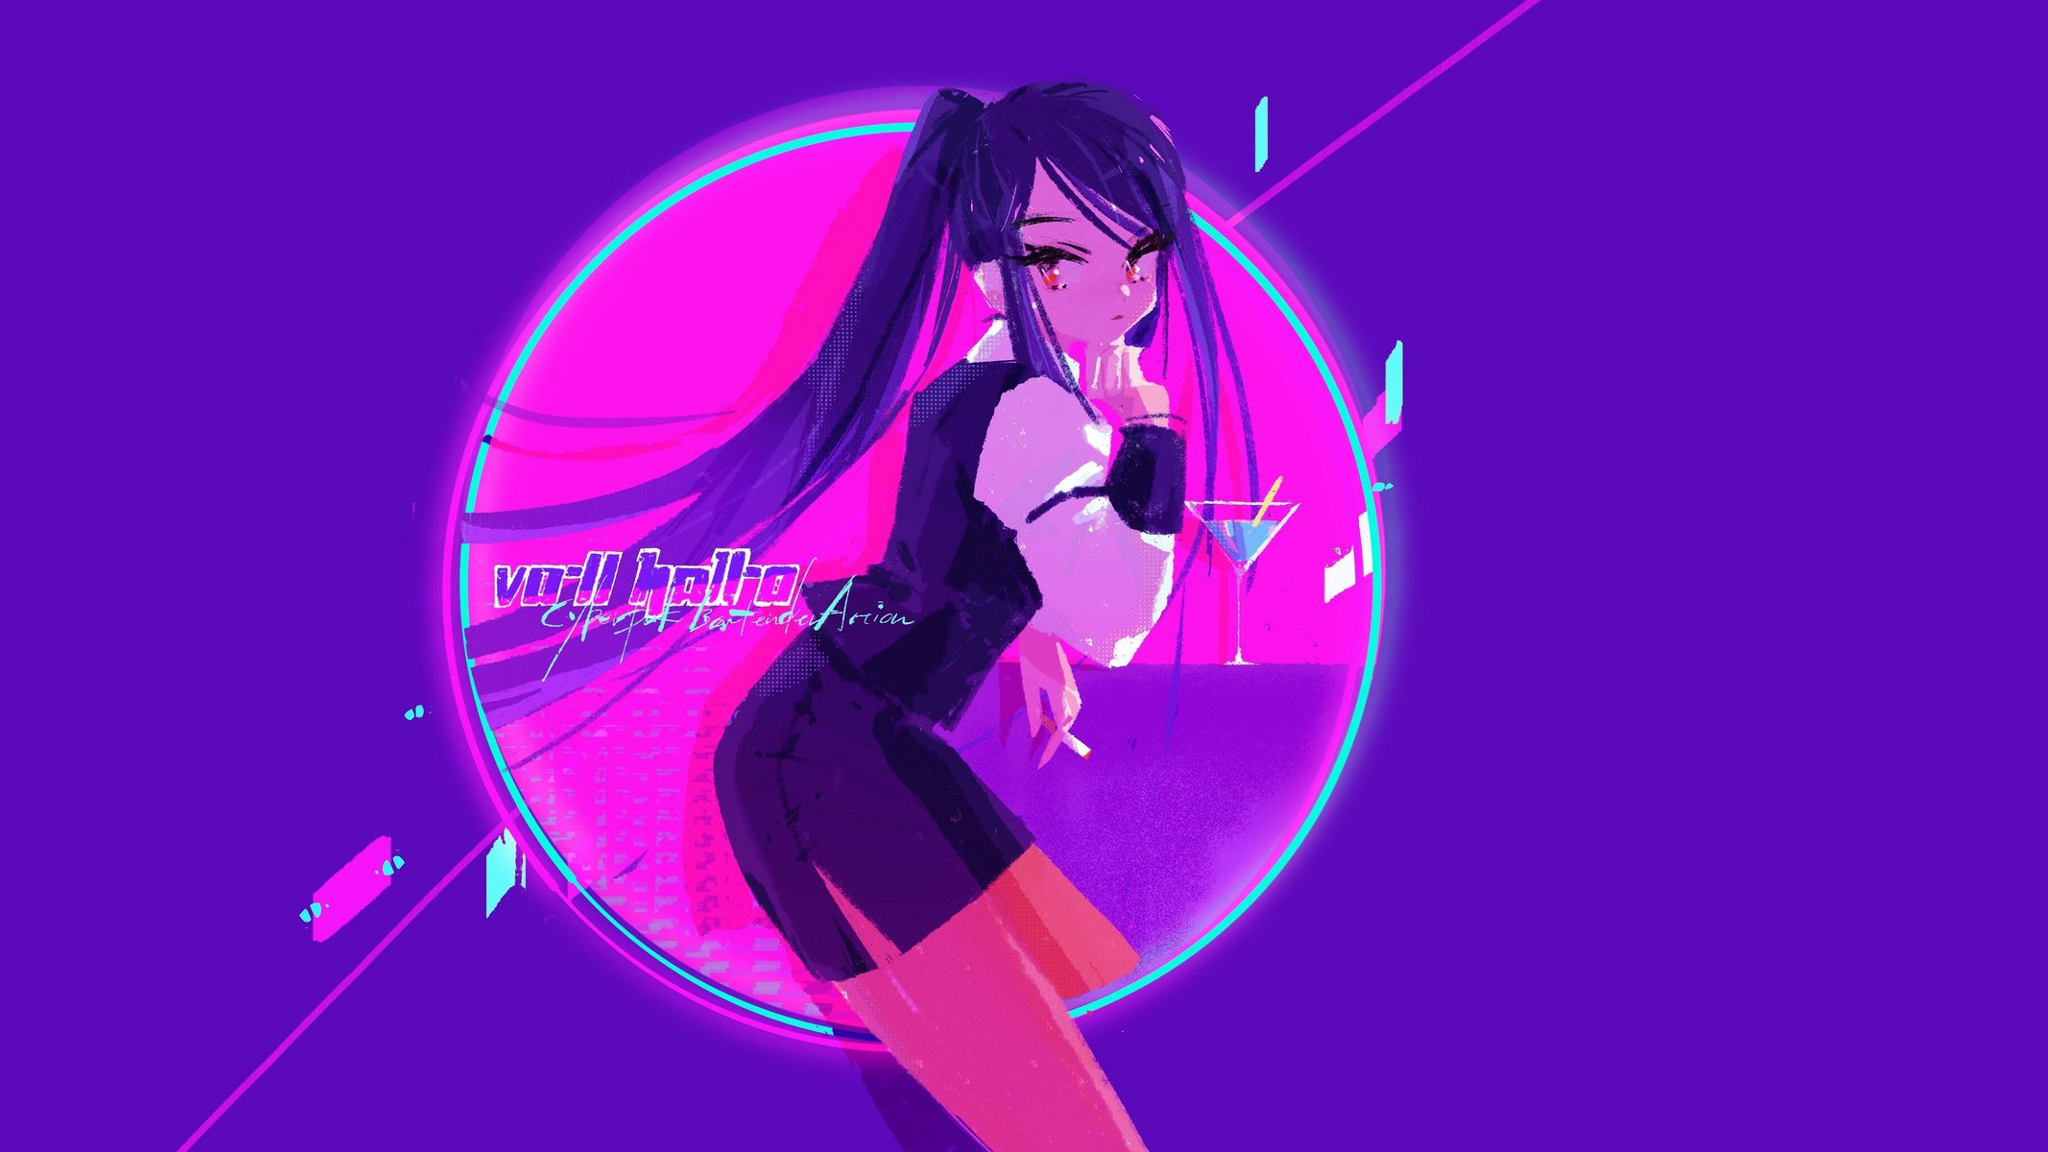 Jill Stingray Va 11 Hall A Looking At Viewer Drink Video Games Video Game Girls 2048x1152